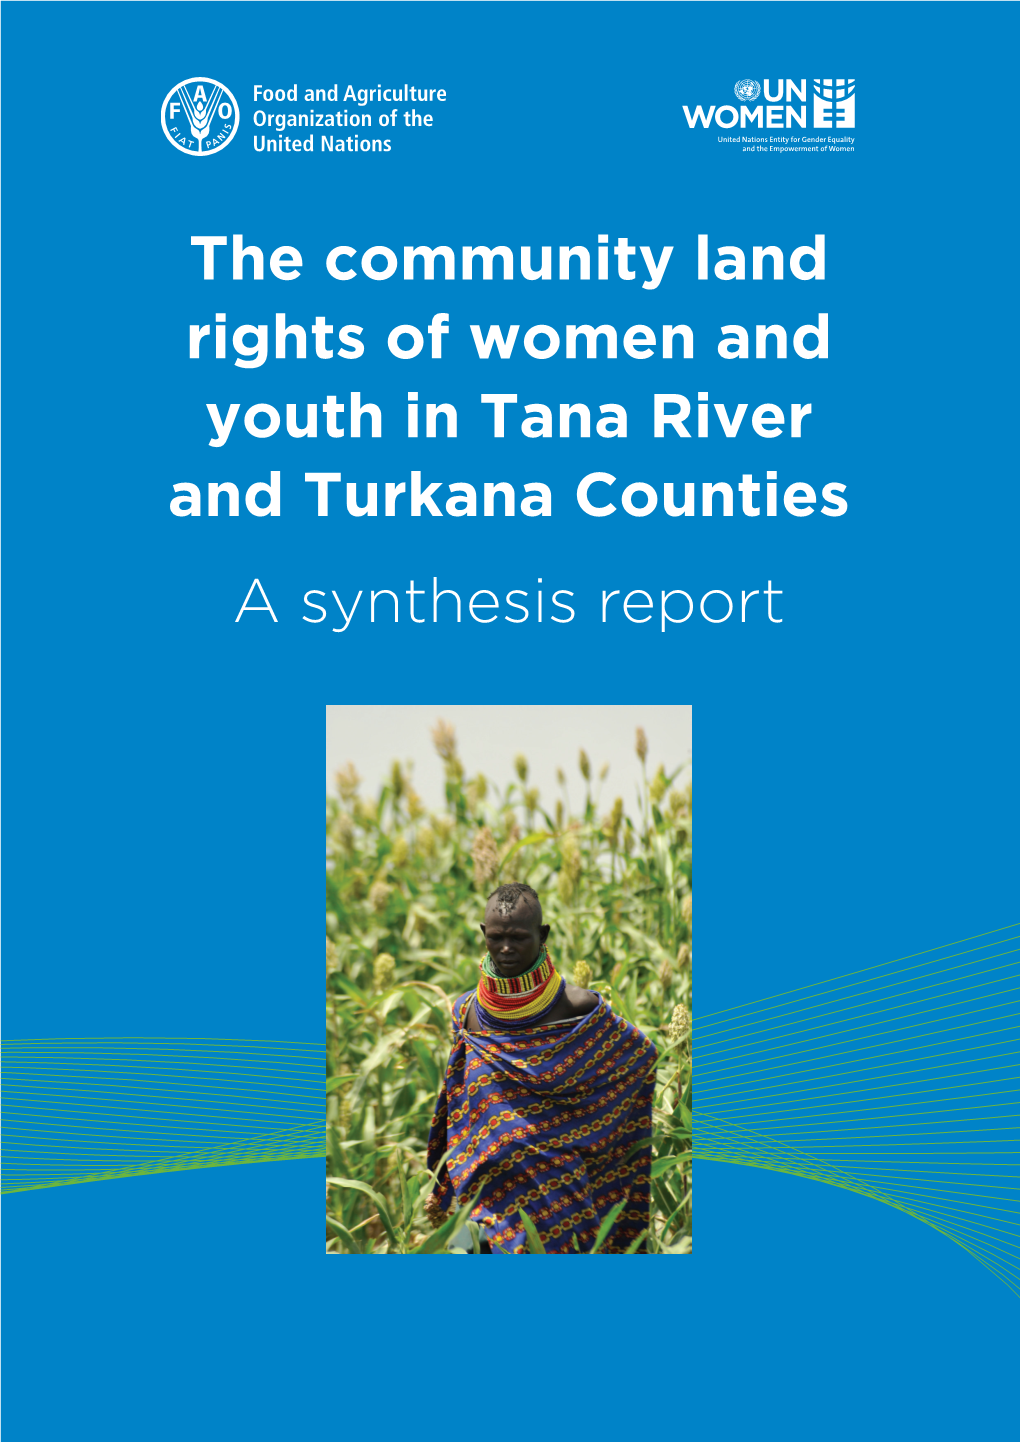 The Community Land Rights of Women and Youth in Tana River and Turkana Counties a Synthesis Report Cover Photo Credit: UN Women Back Cover Photo Credit: R